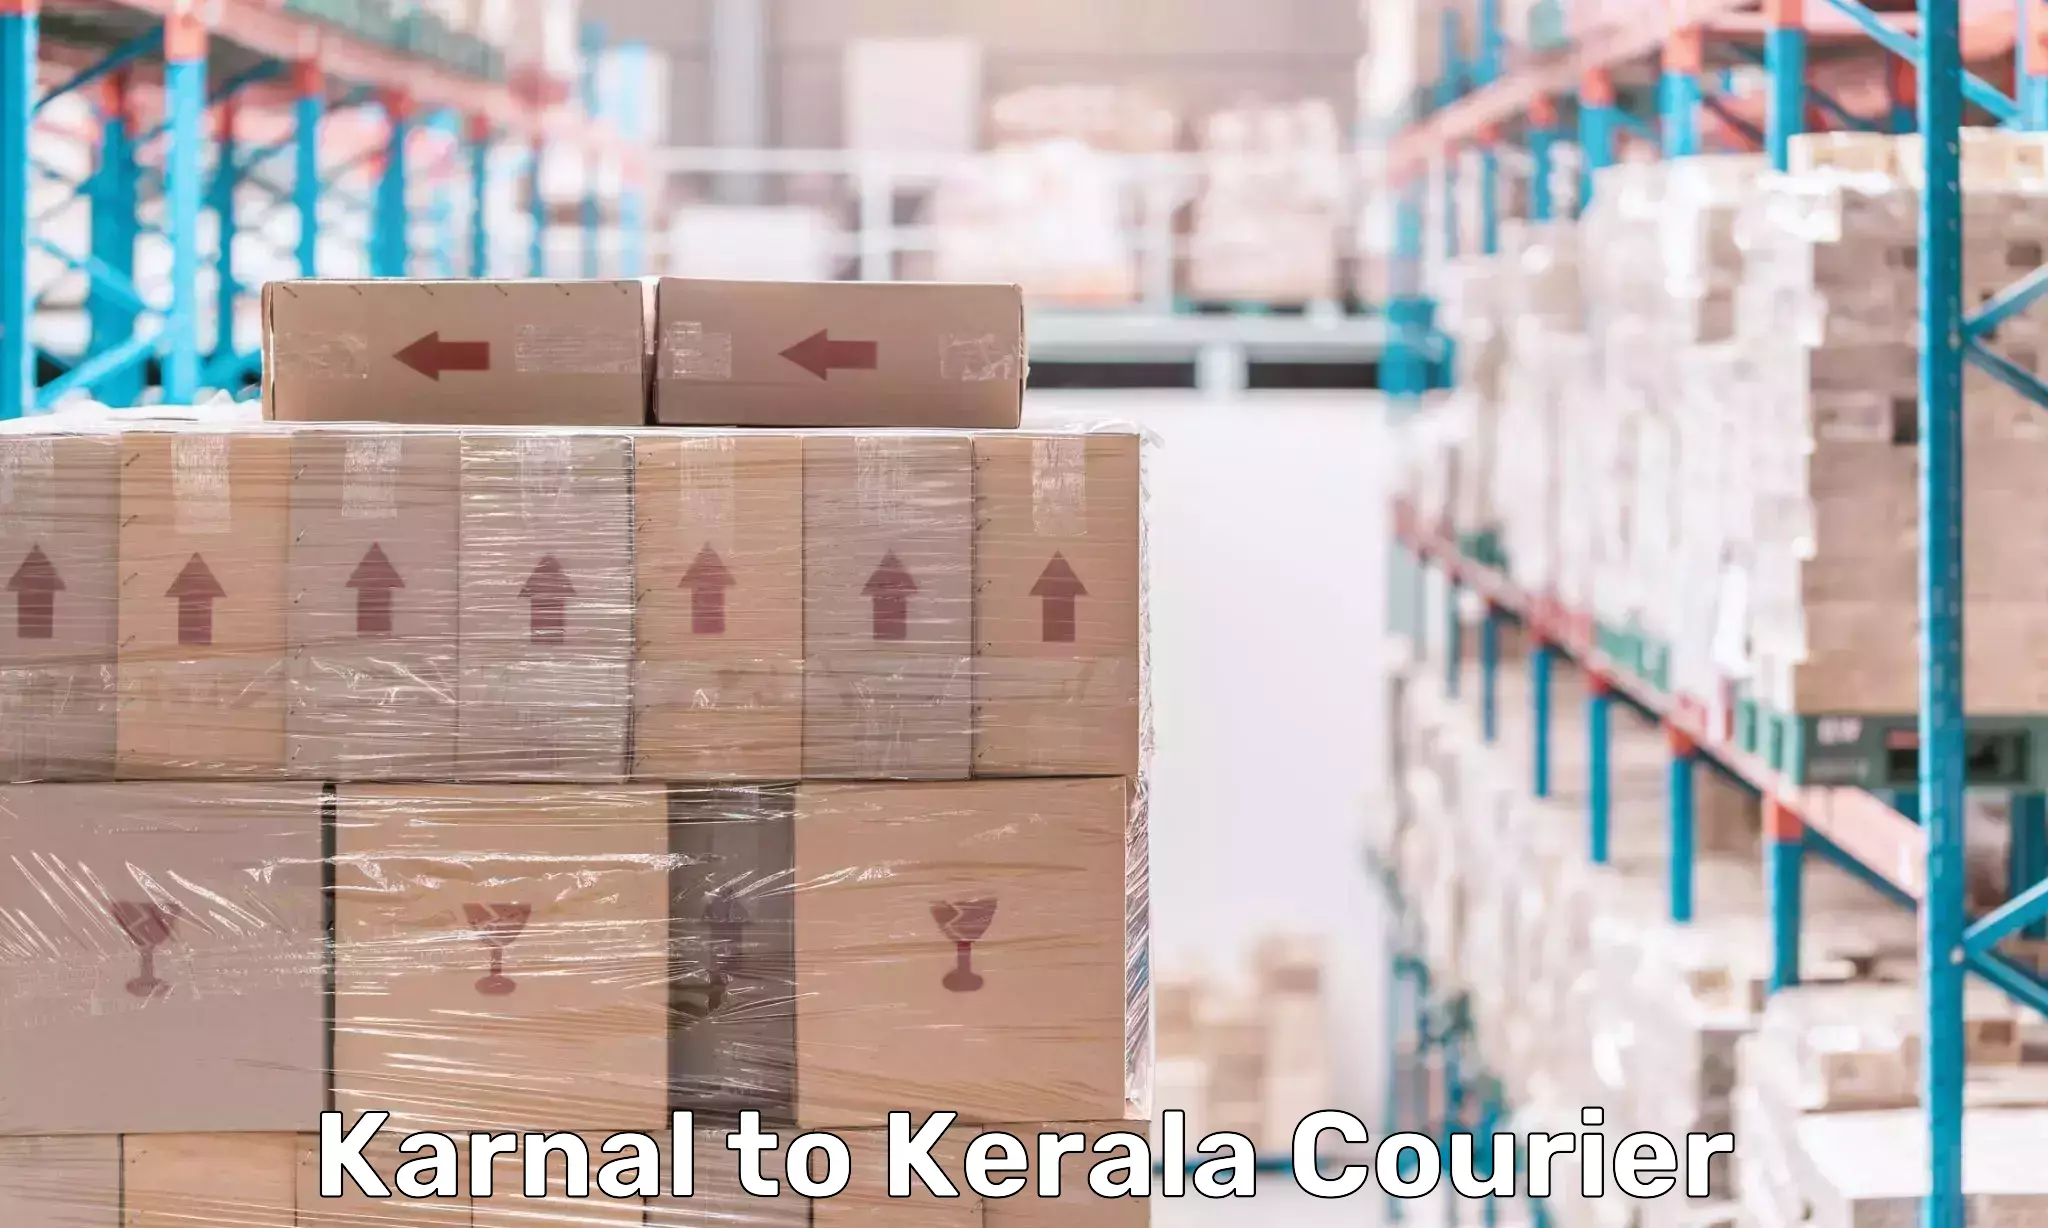 Residential courier service Karnal to Kerala